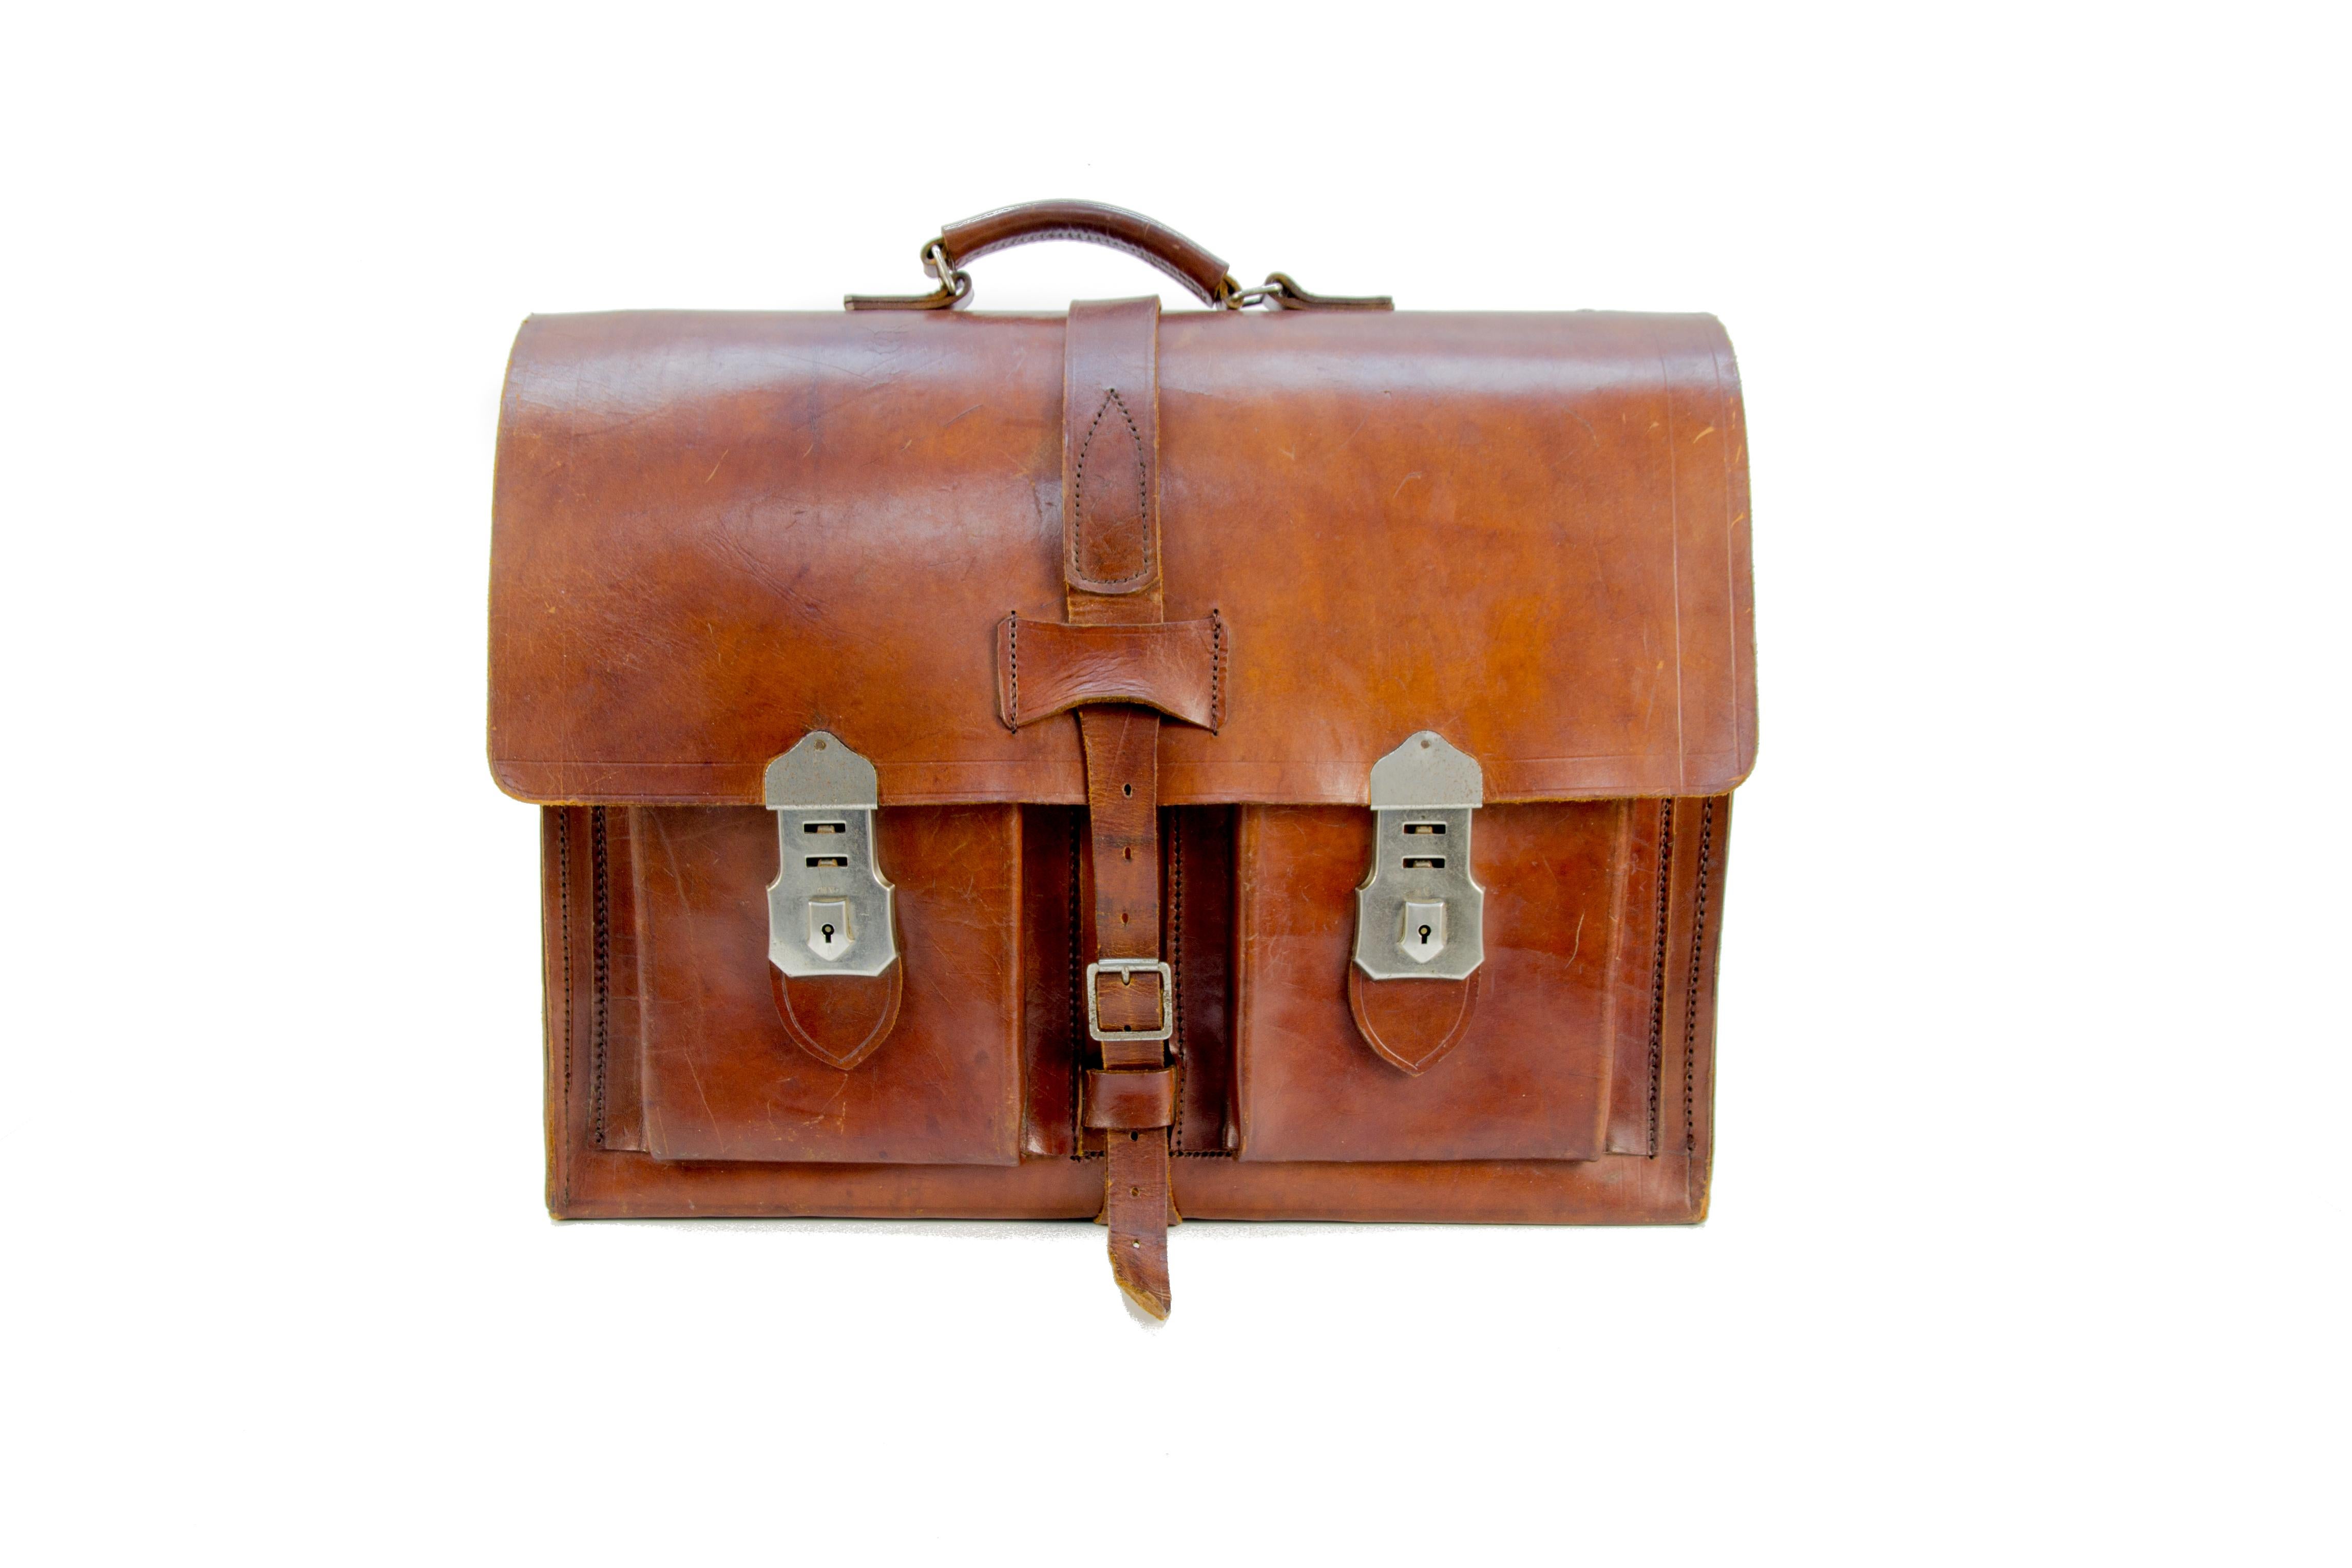 High-quality thick leather briefcase in beautiful brown tones with Cheney locks, the key is not included.
Belgium, the 1960s.
Dimensions:
Width 47 cm / 18.5 in; height 33 cm / 12.99 in; depth 18 cm / 7.08 in.